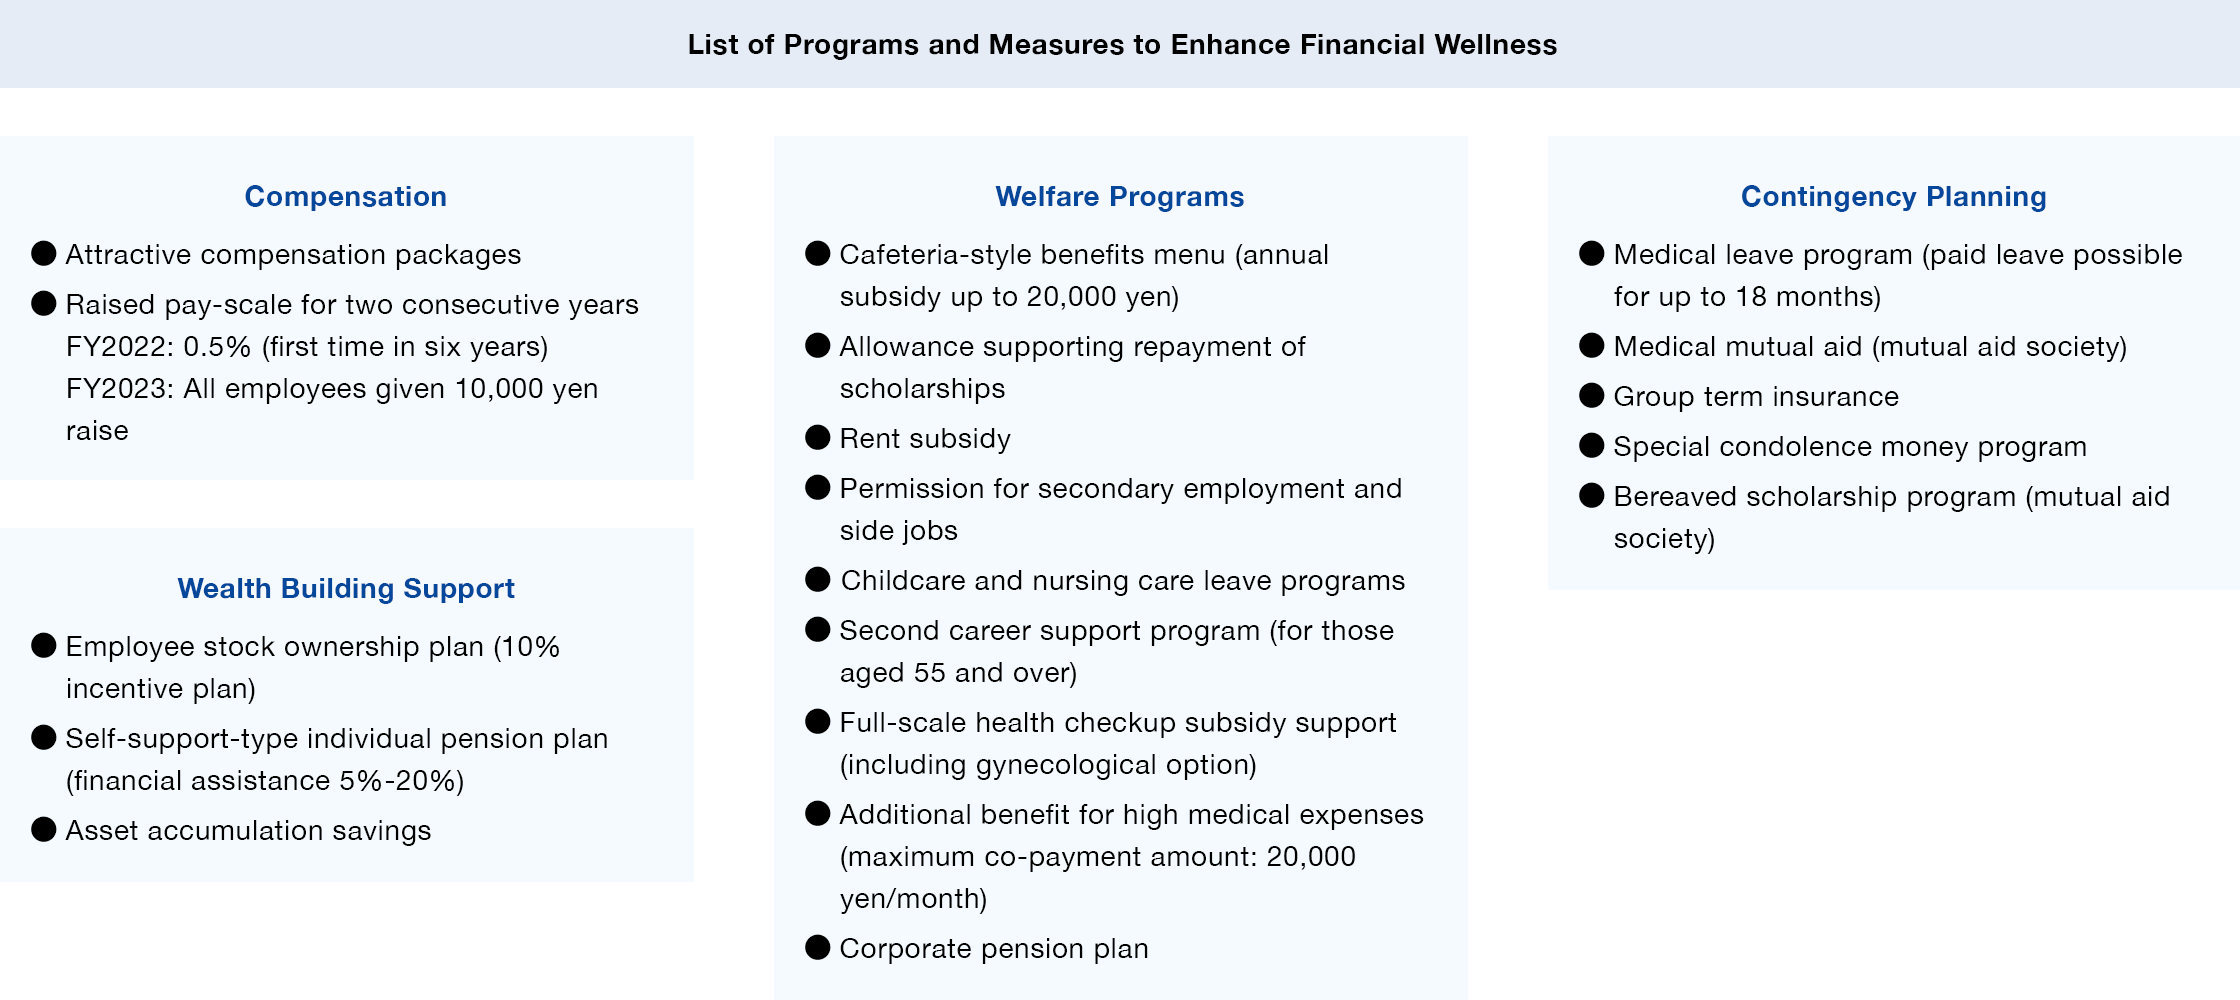 VList of Programs and Measures to Enhance Financial Wellness